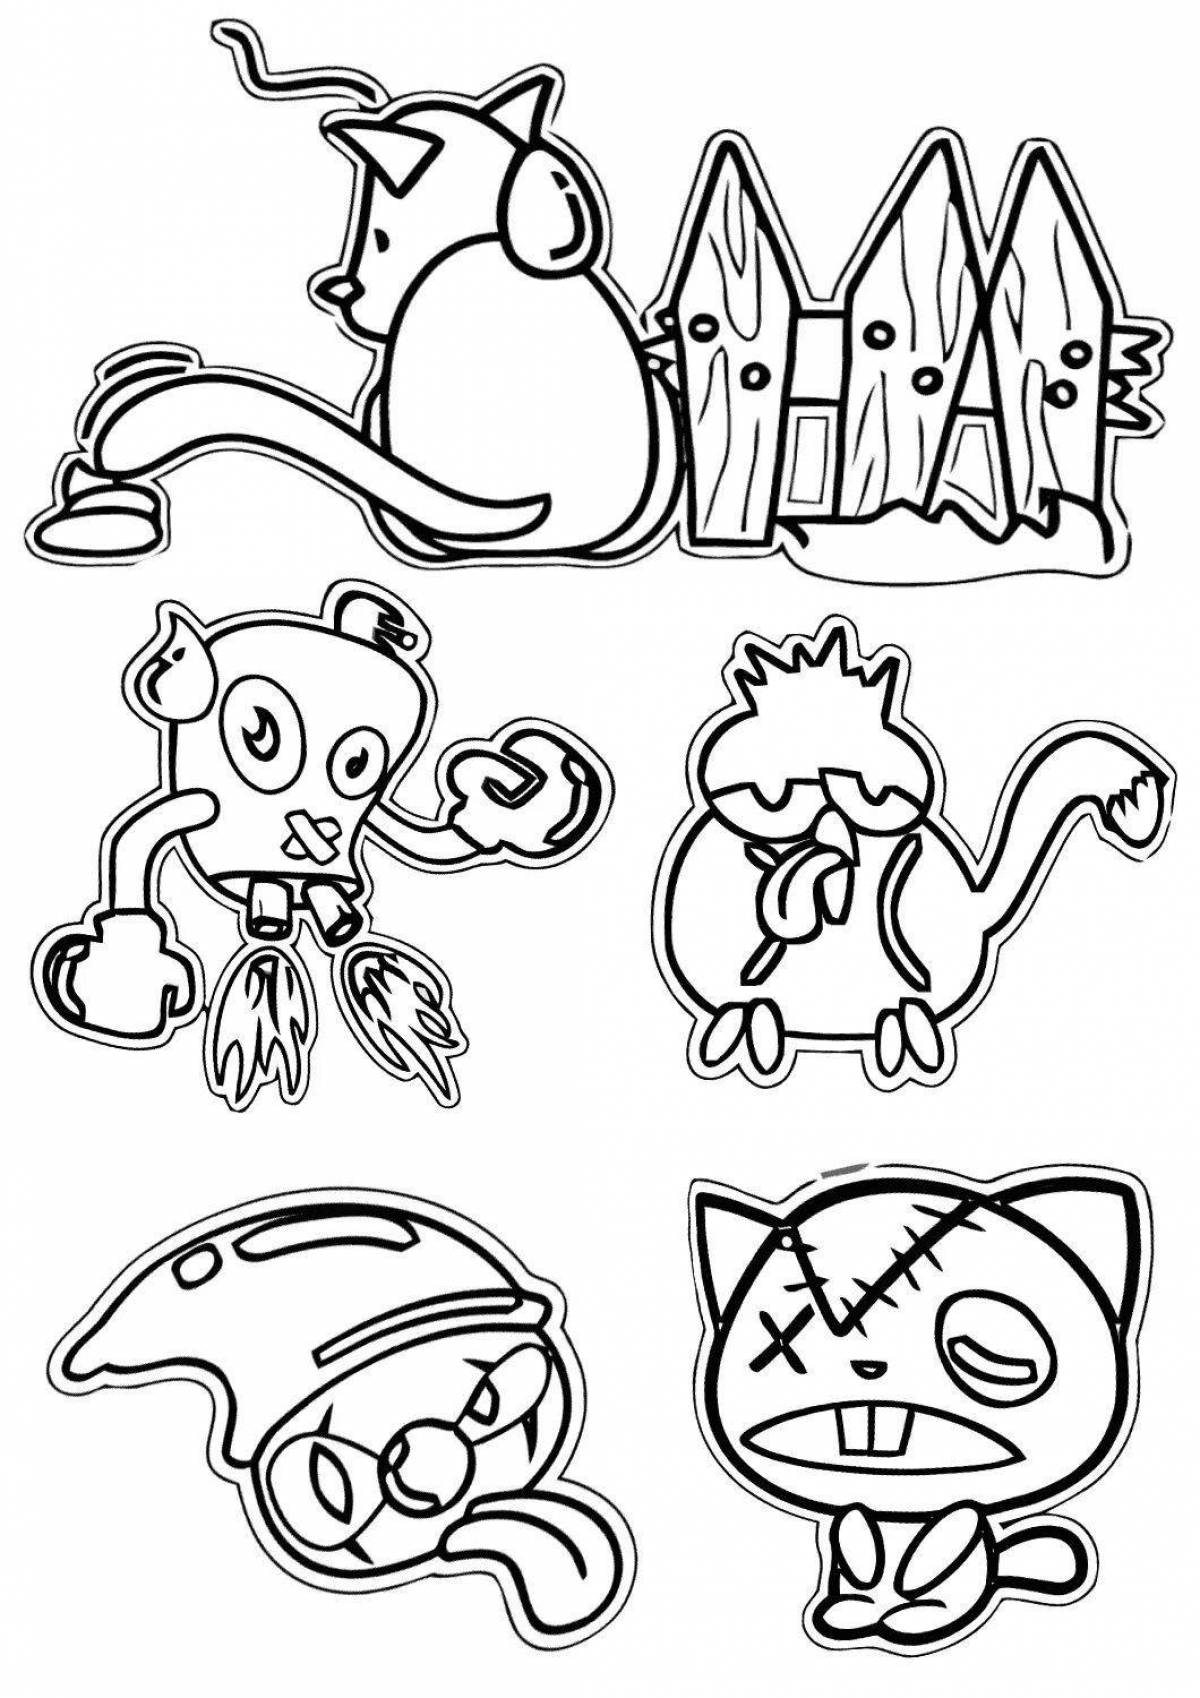 Coloring pages with stickers